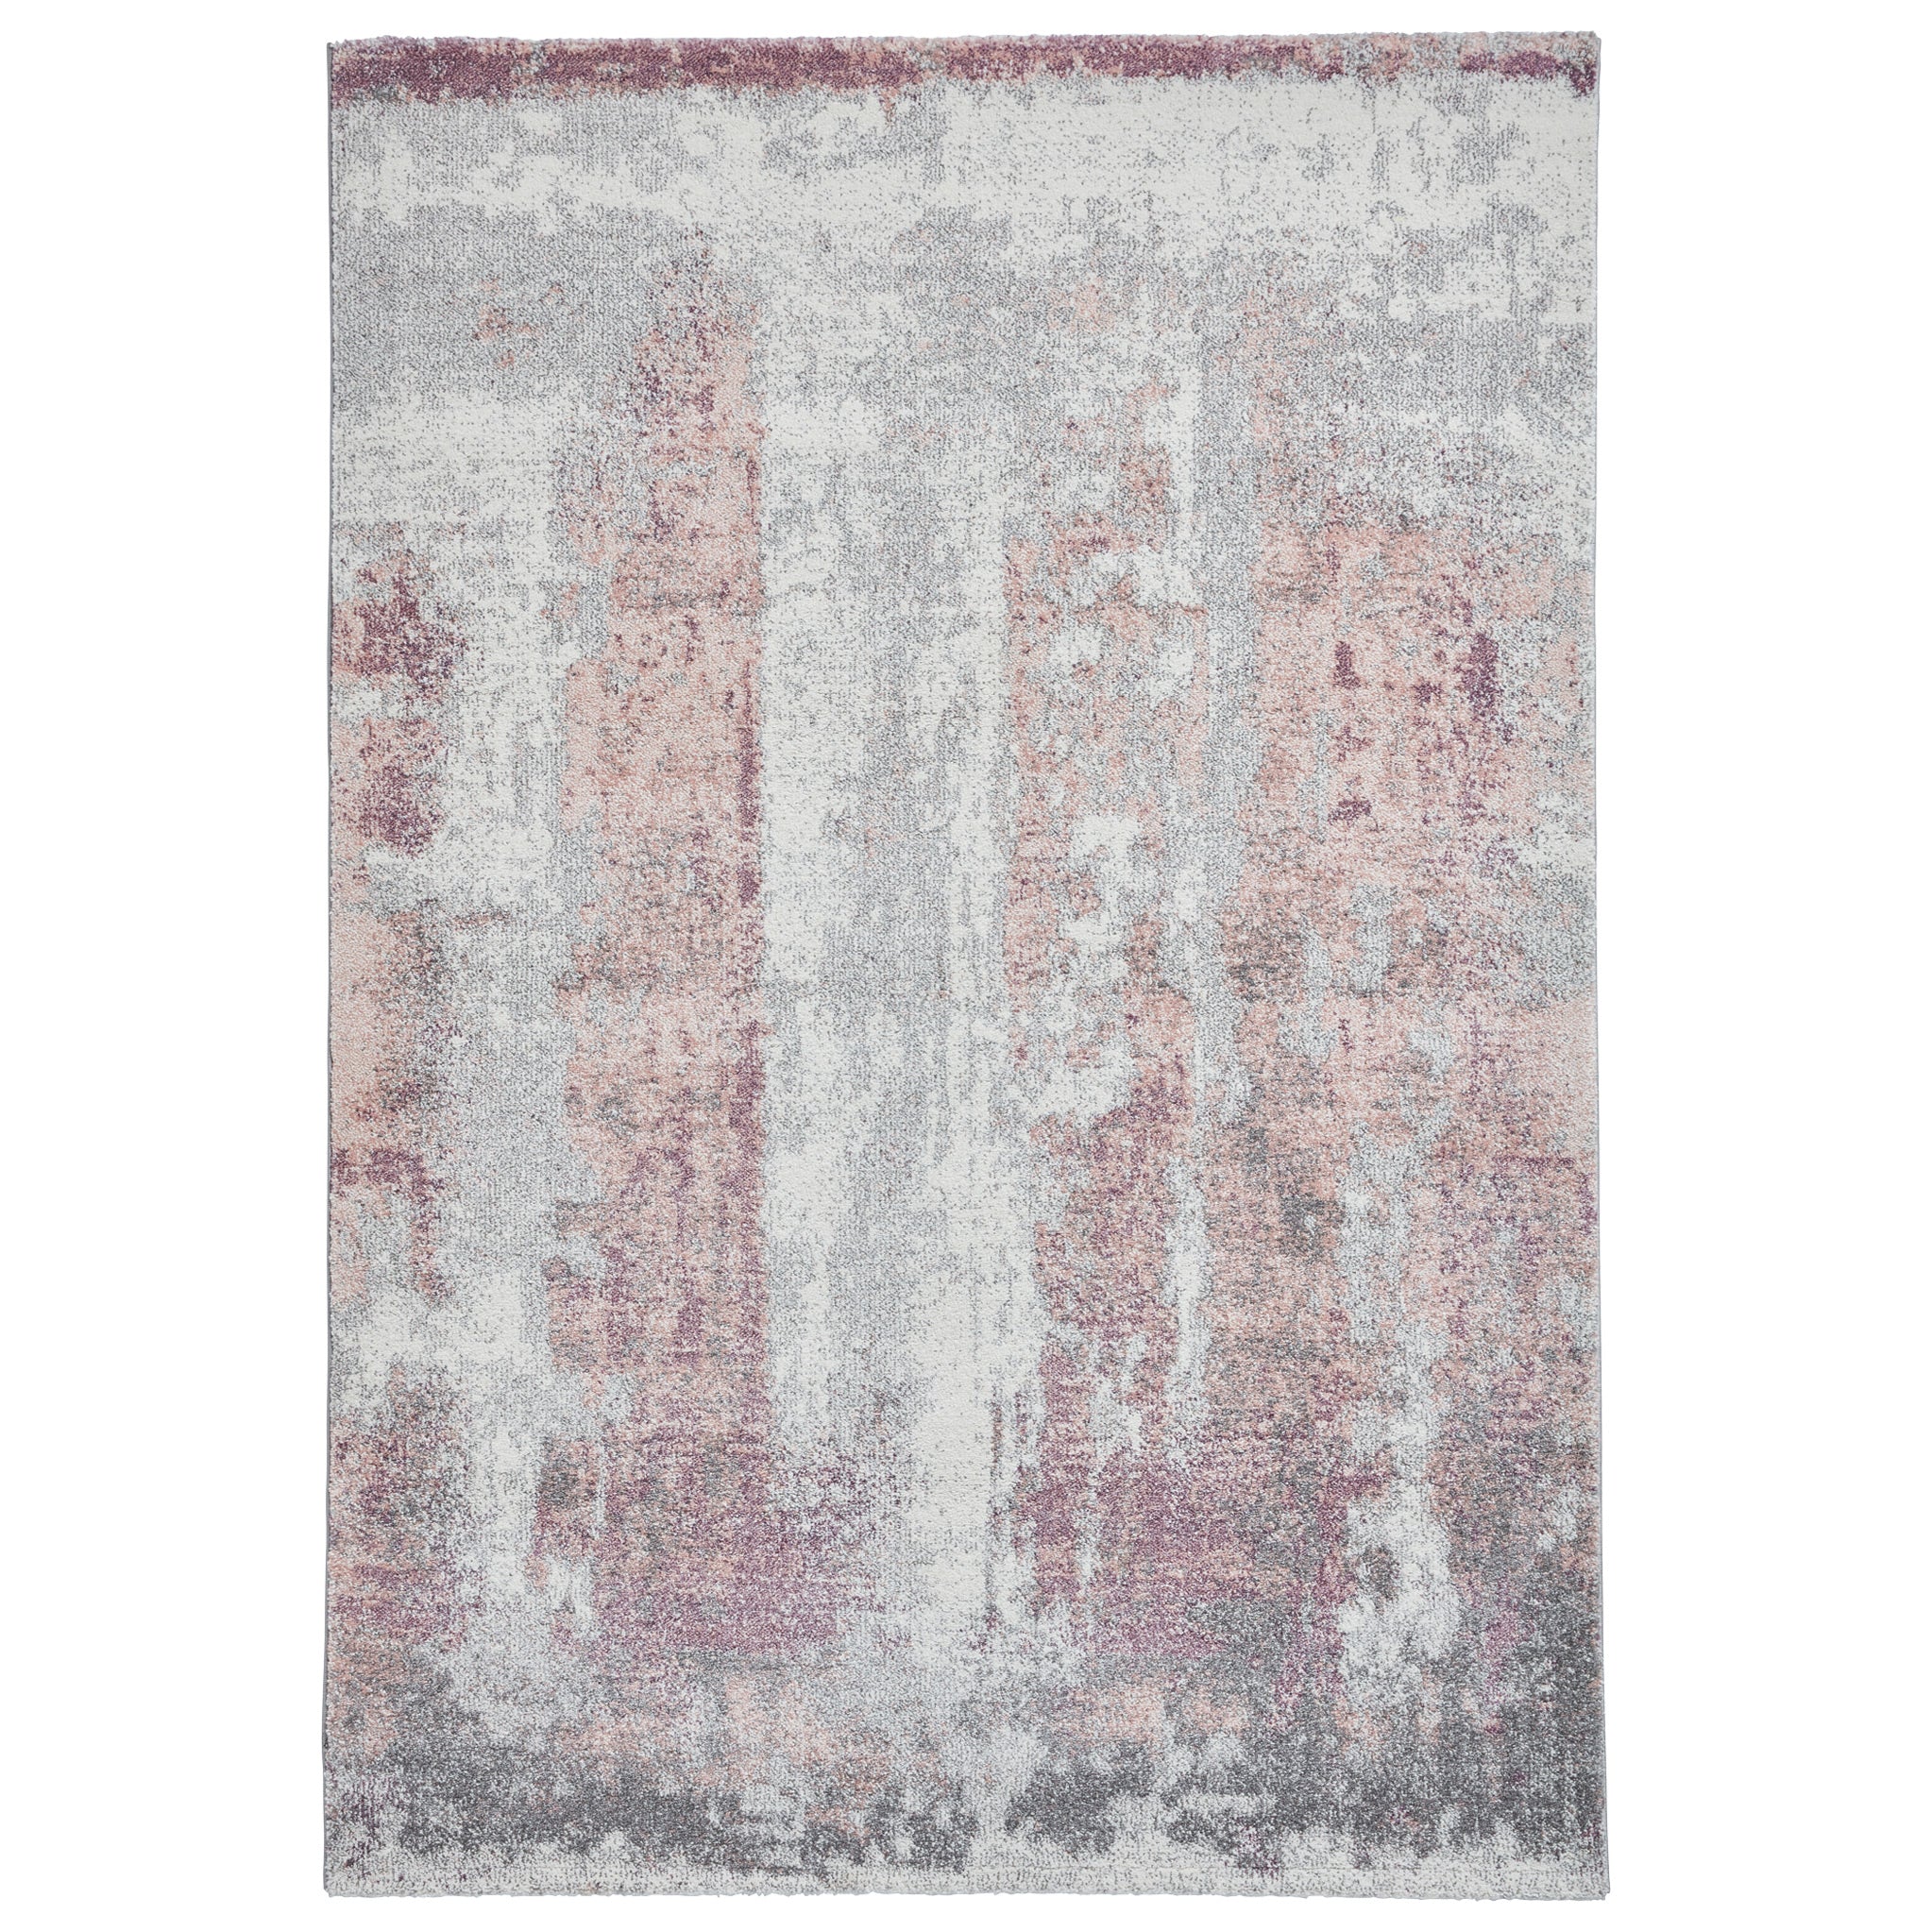 Brockton Abstract Patterned Hand Carved Rug For Living Room Or Bedroom